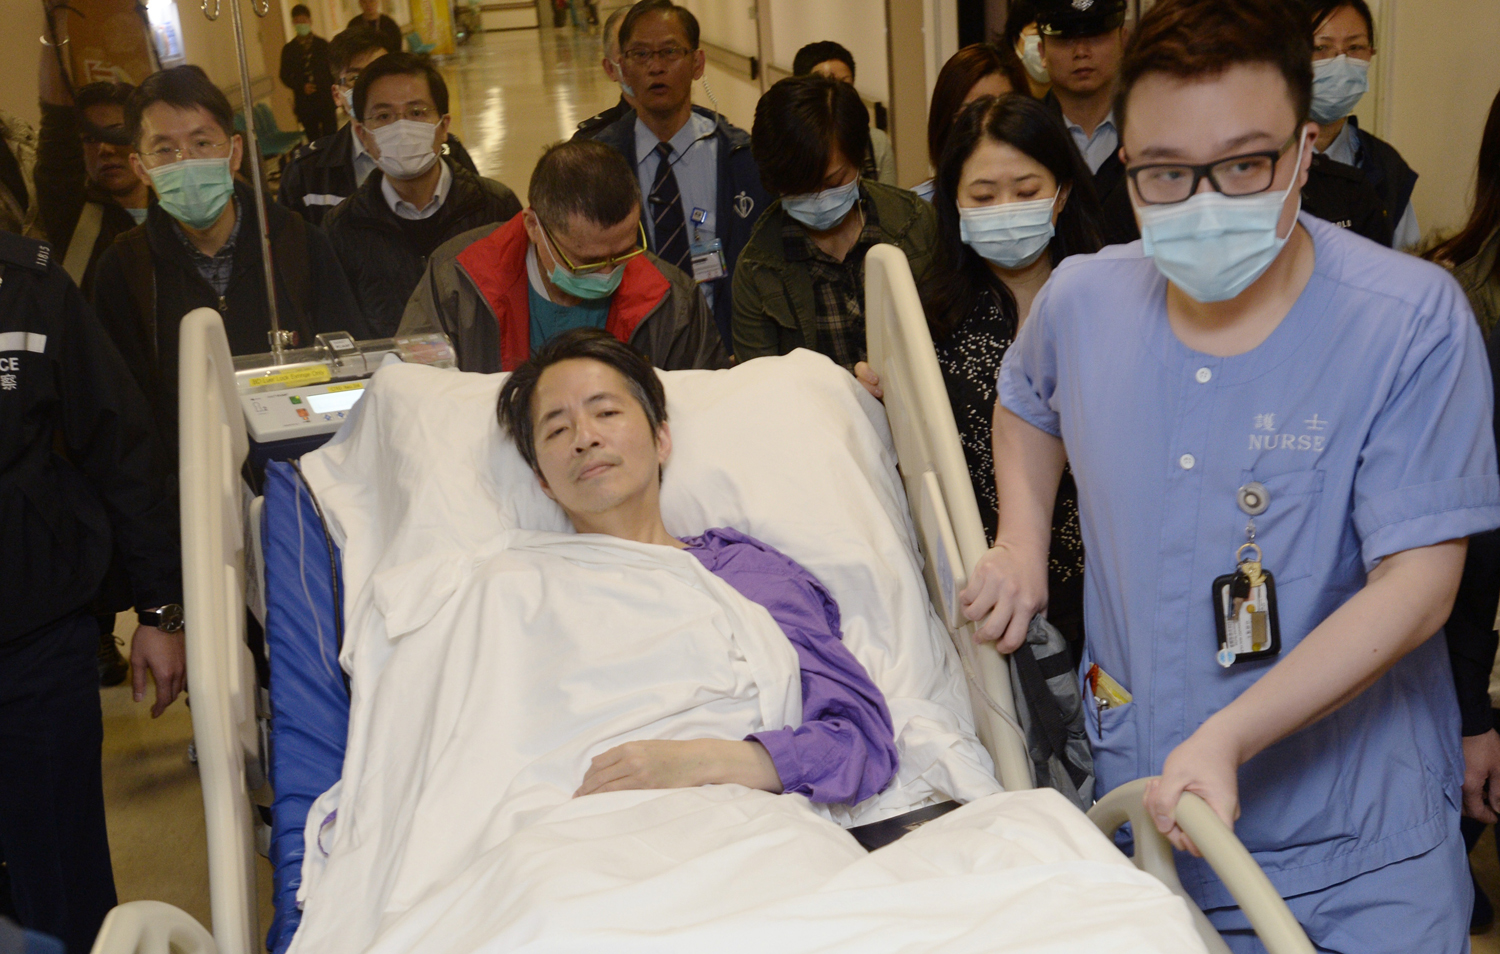 Ming Pao's former chief editor Kevin Lau, who was brutally attacked on Wednesday, is transferred to a private ward in Eastern Hospital after spending three days in intensive care in Hong Kong